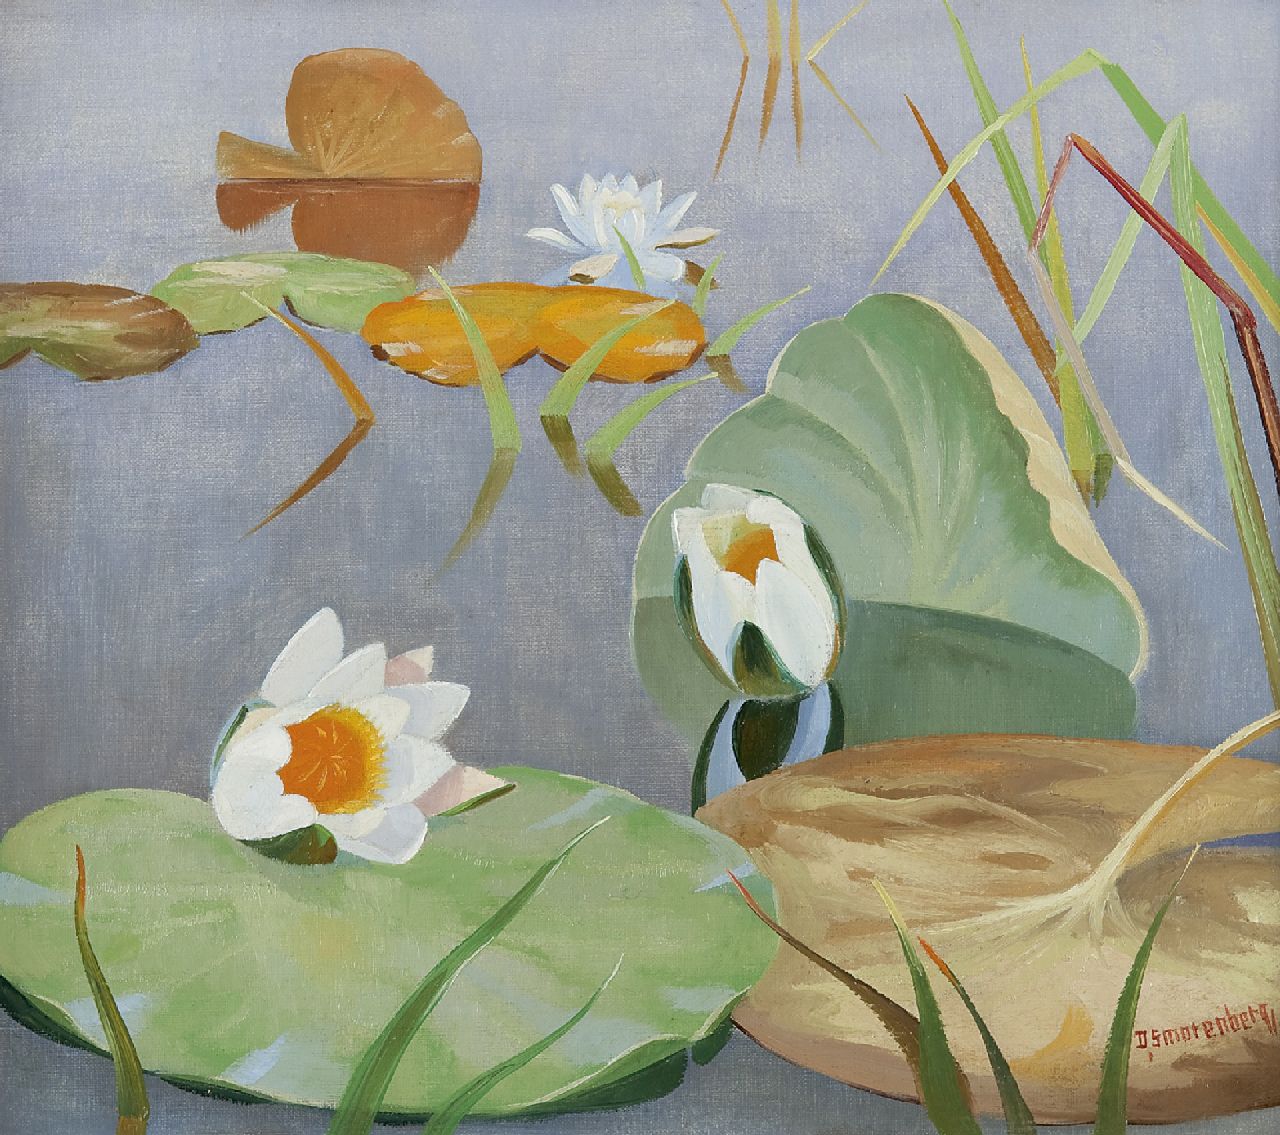 Smorenberg D.  | Dirk Smorenberg, Water lilies, oil on canvas 34.4 x 39.3 cm, signed l.r.